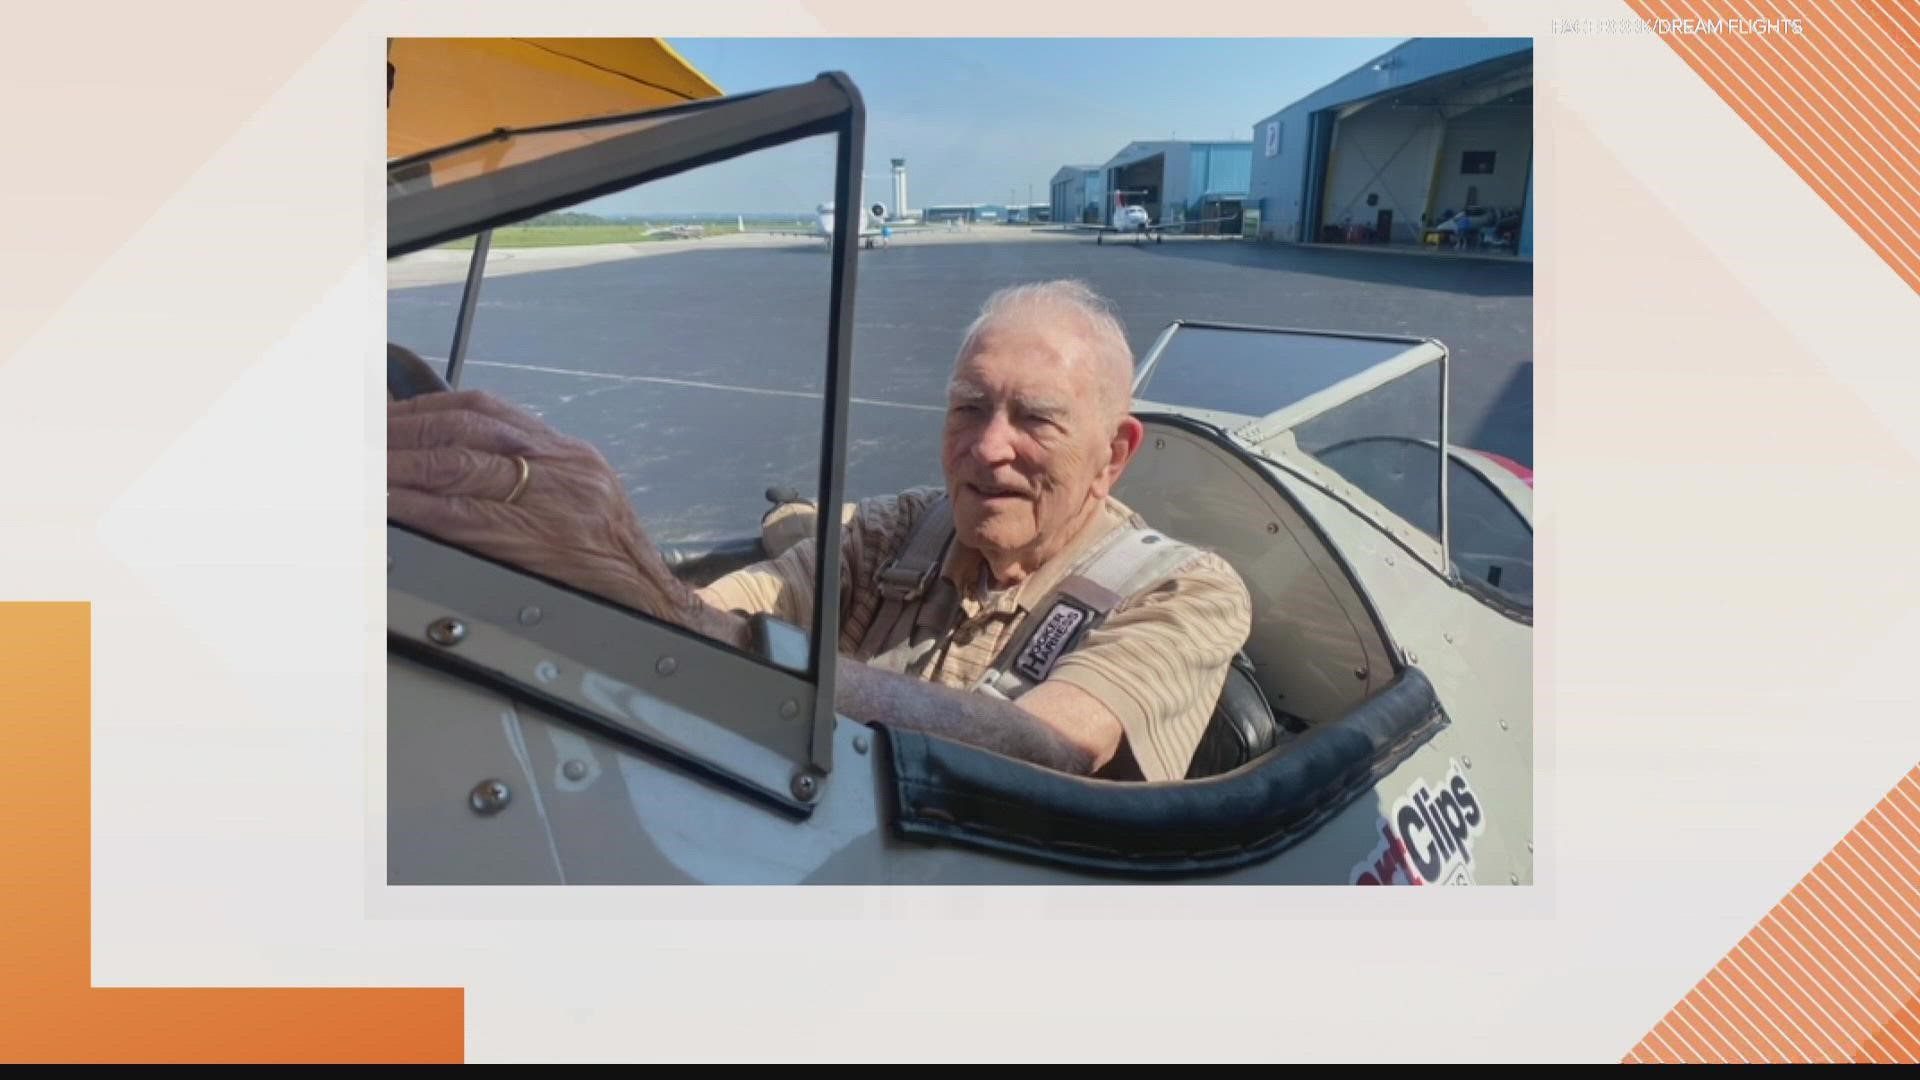 "Operation September Freedom" allows veterans to fly in vintage airplanes thanks to Dream Flights.